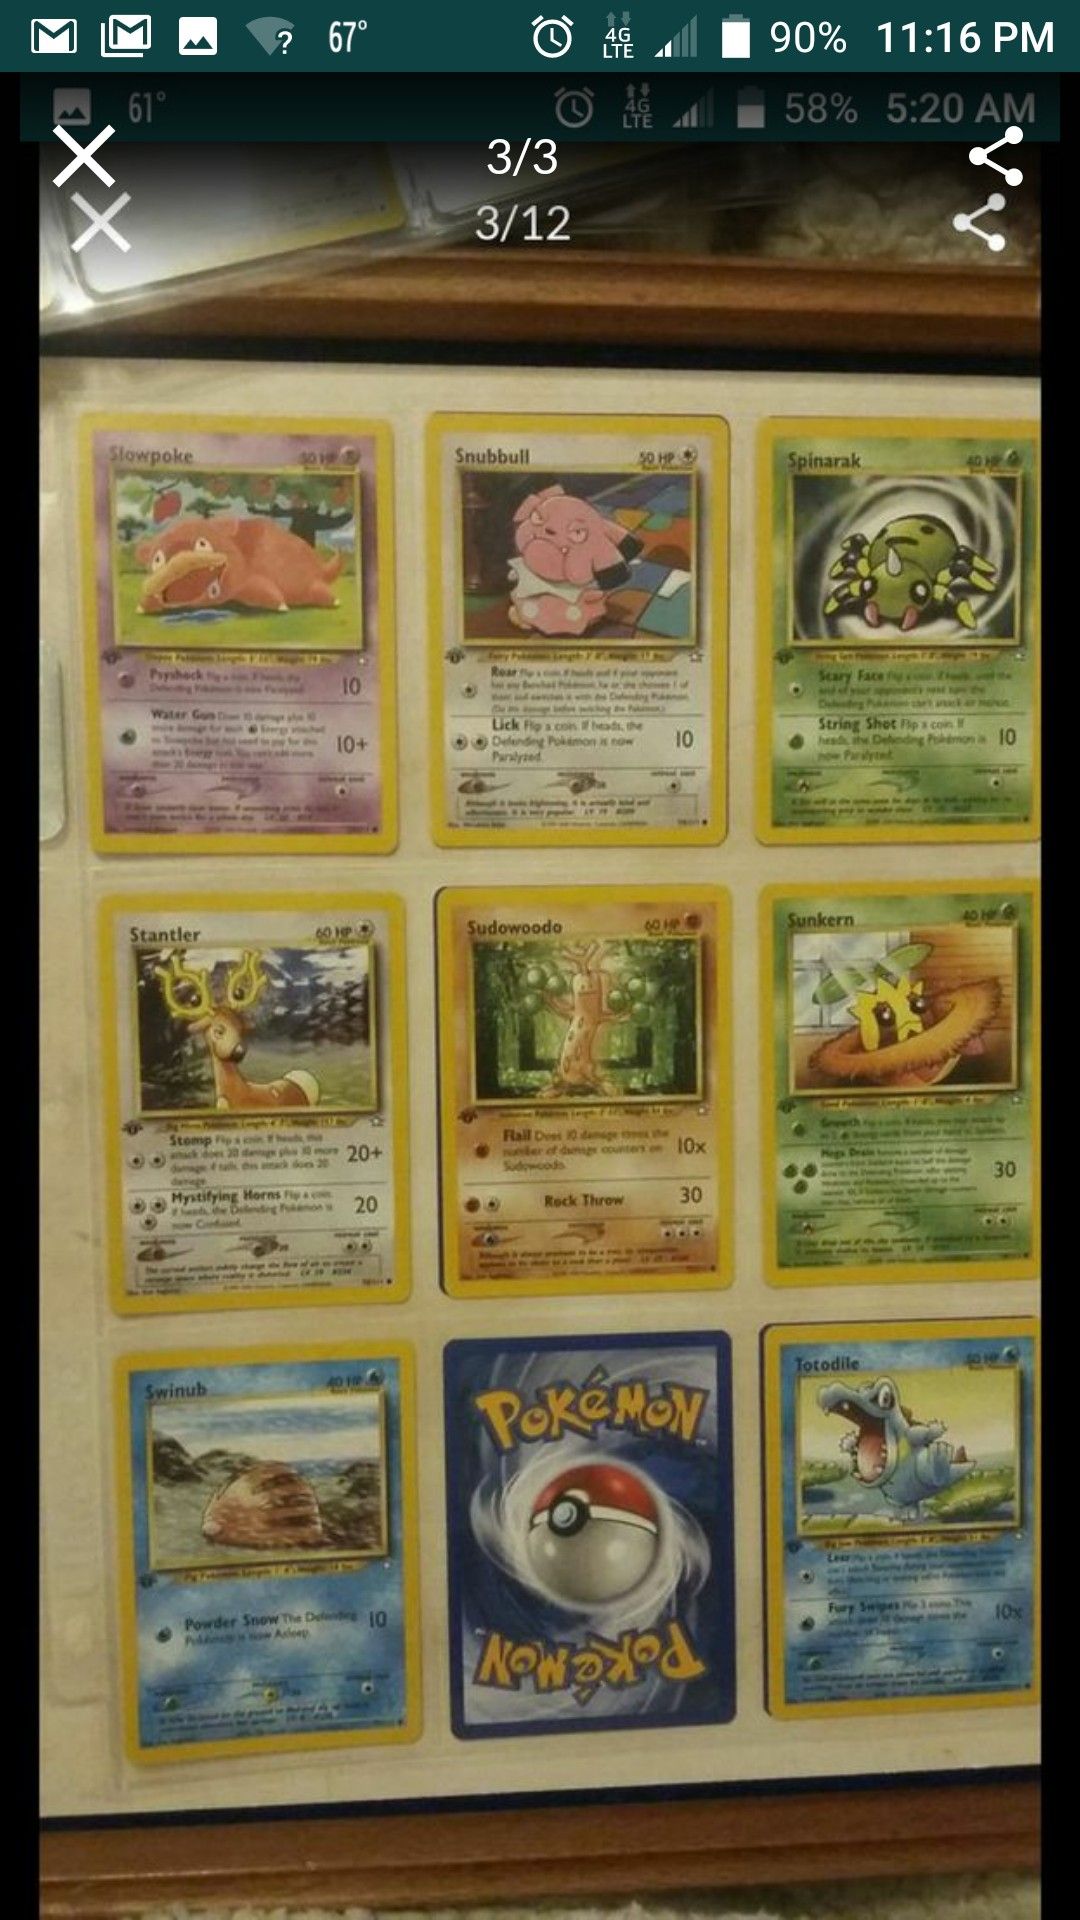 1st EDITION POKEMON CARDS COMMON AND UNCOMMON